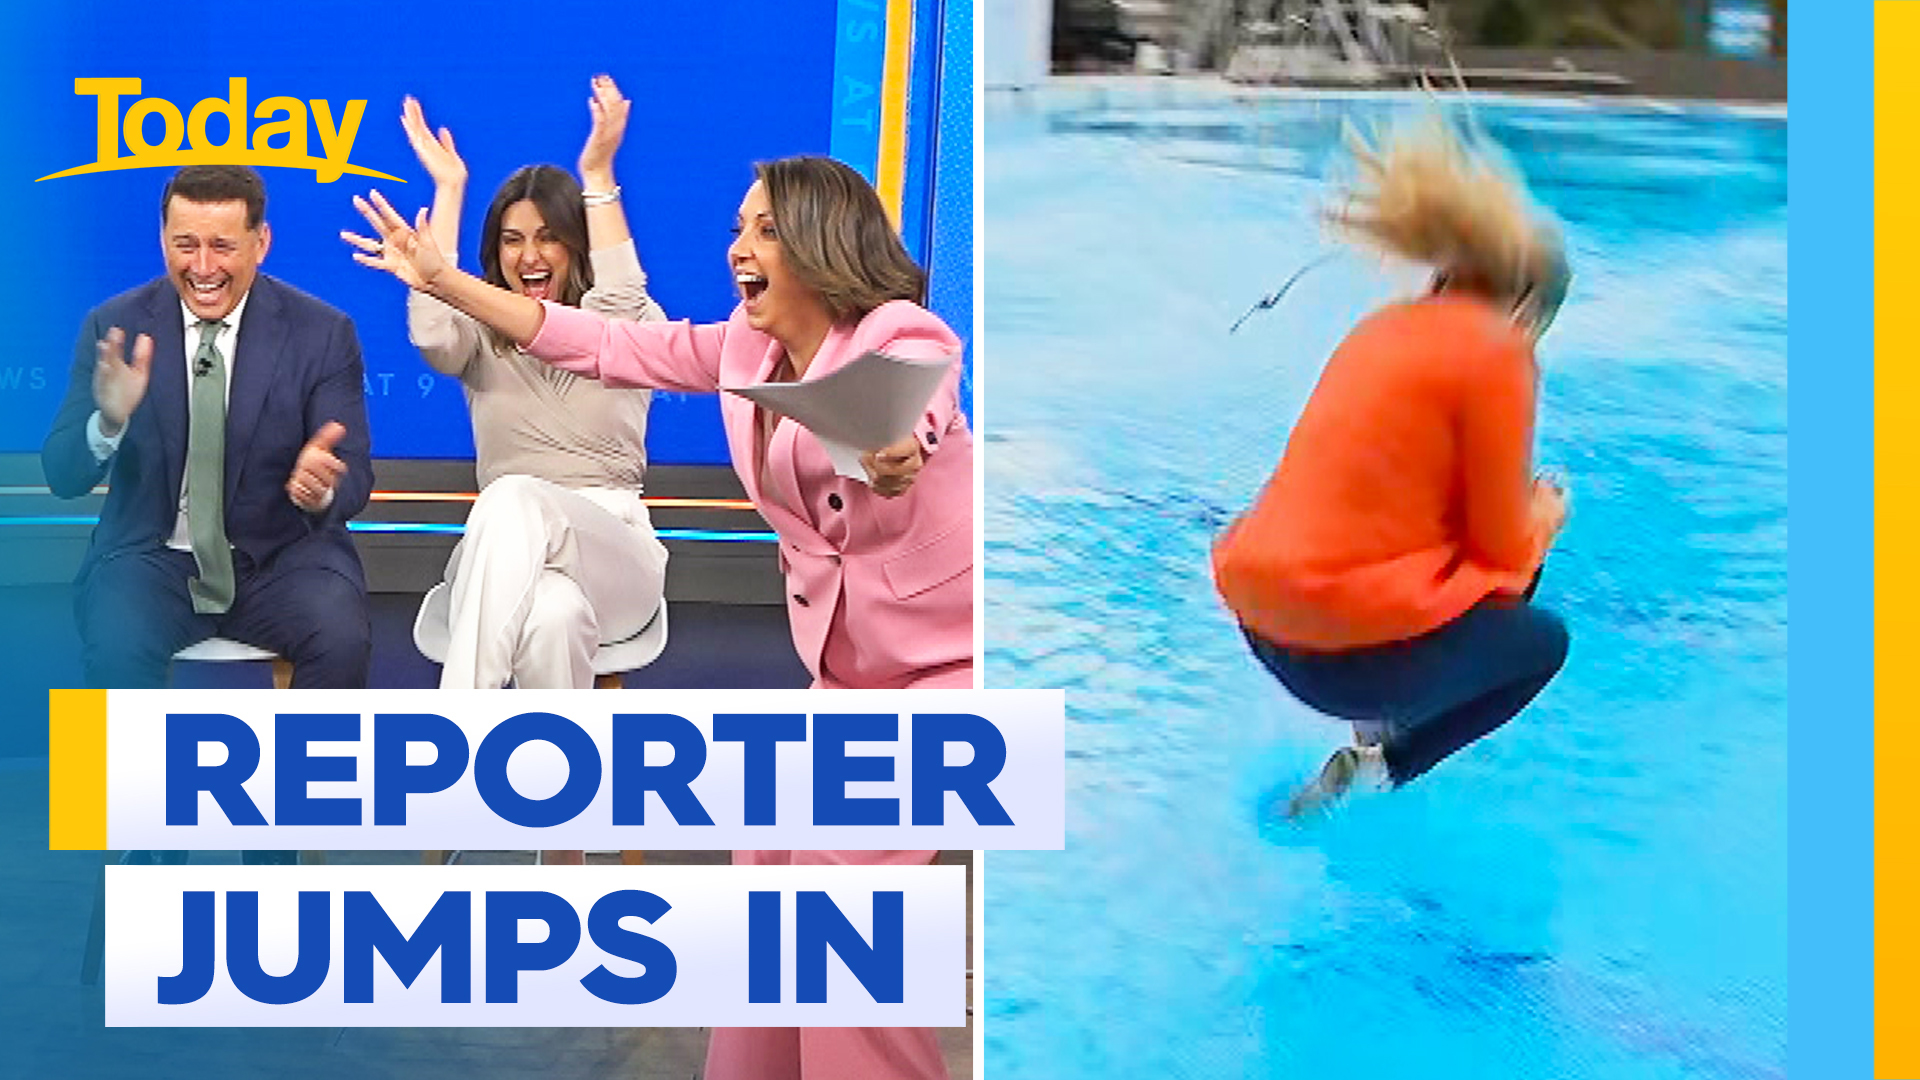 Today reporter gets soaked jumping in pool